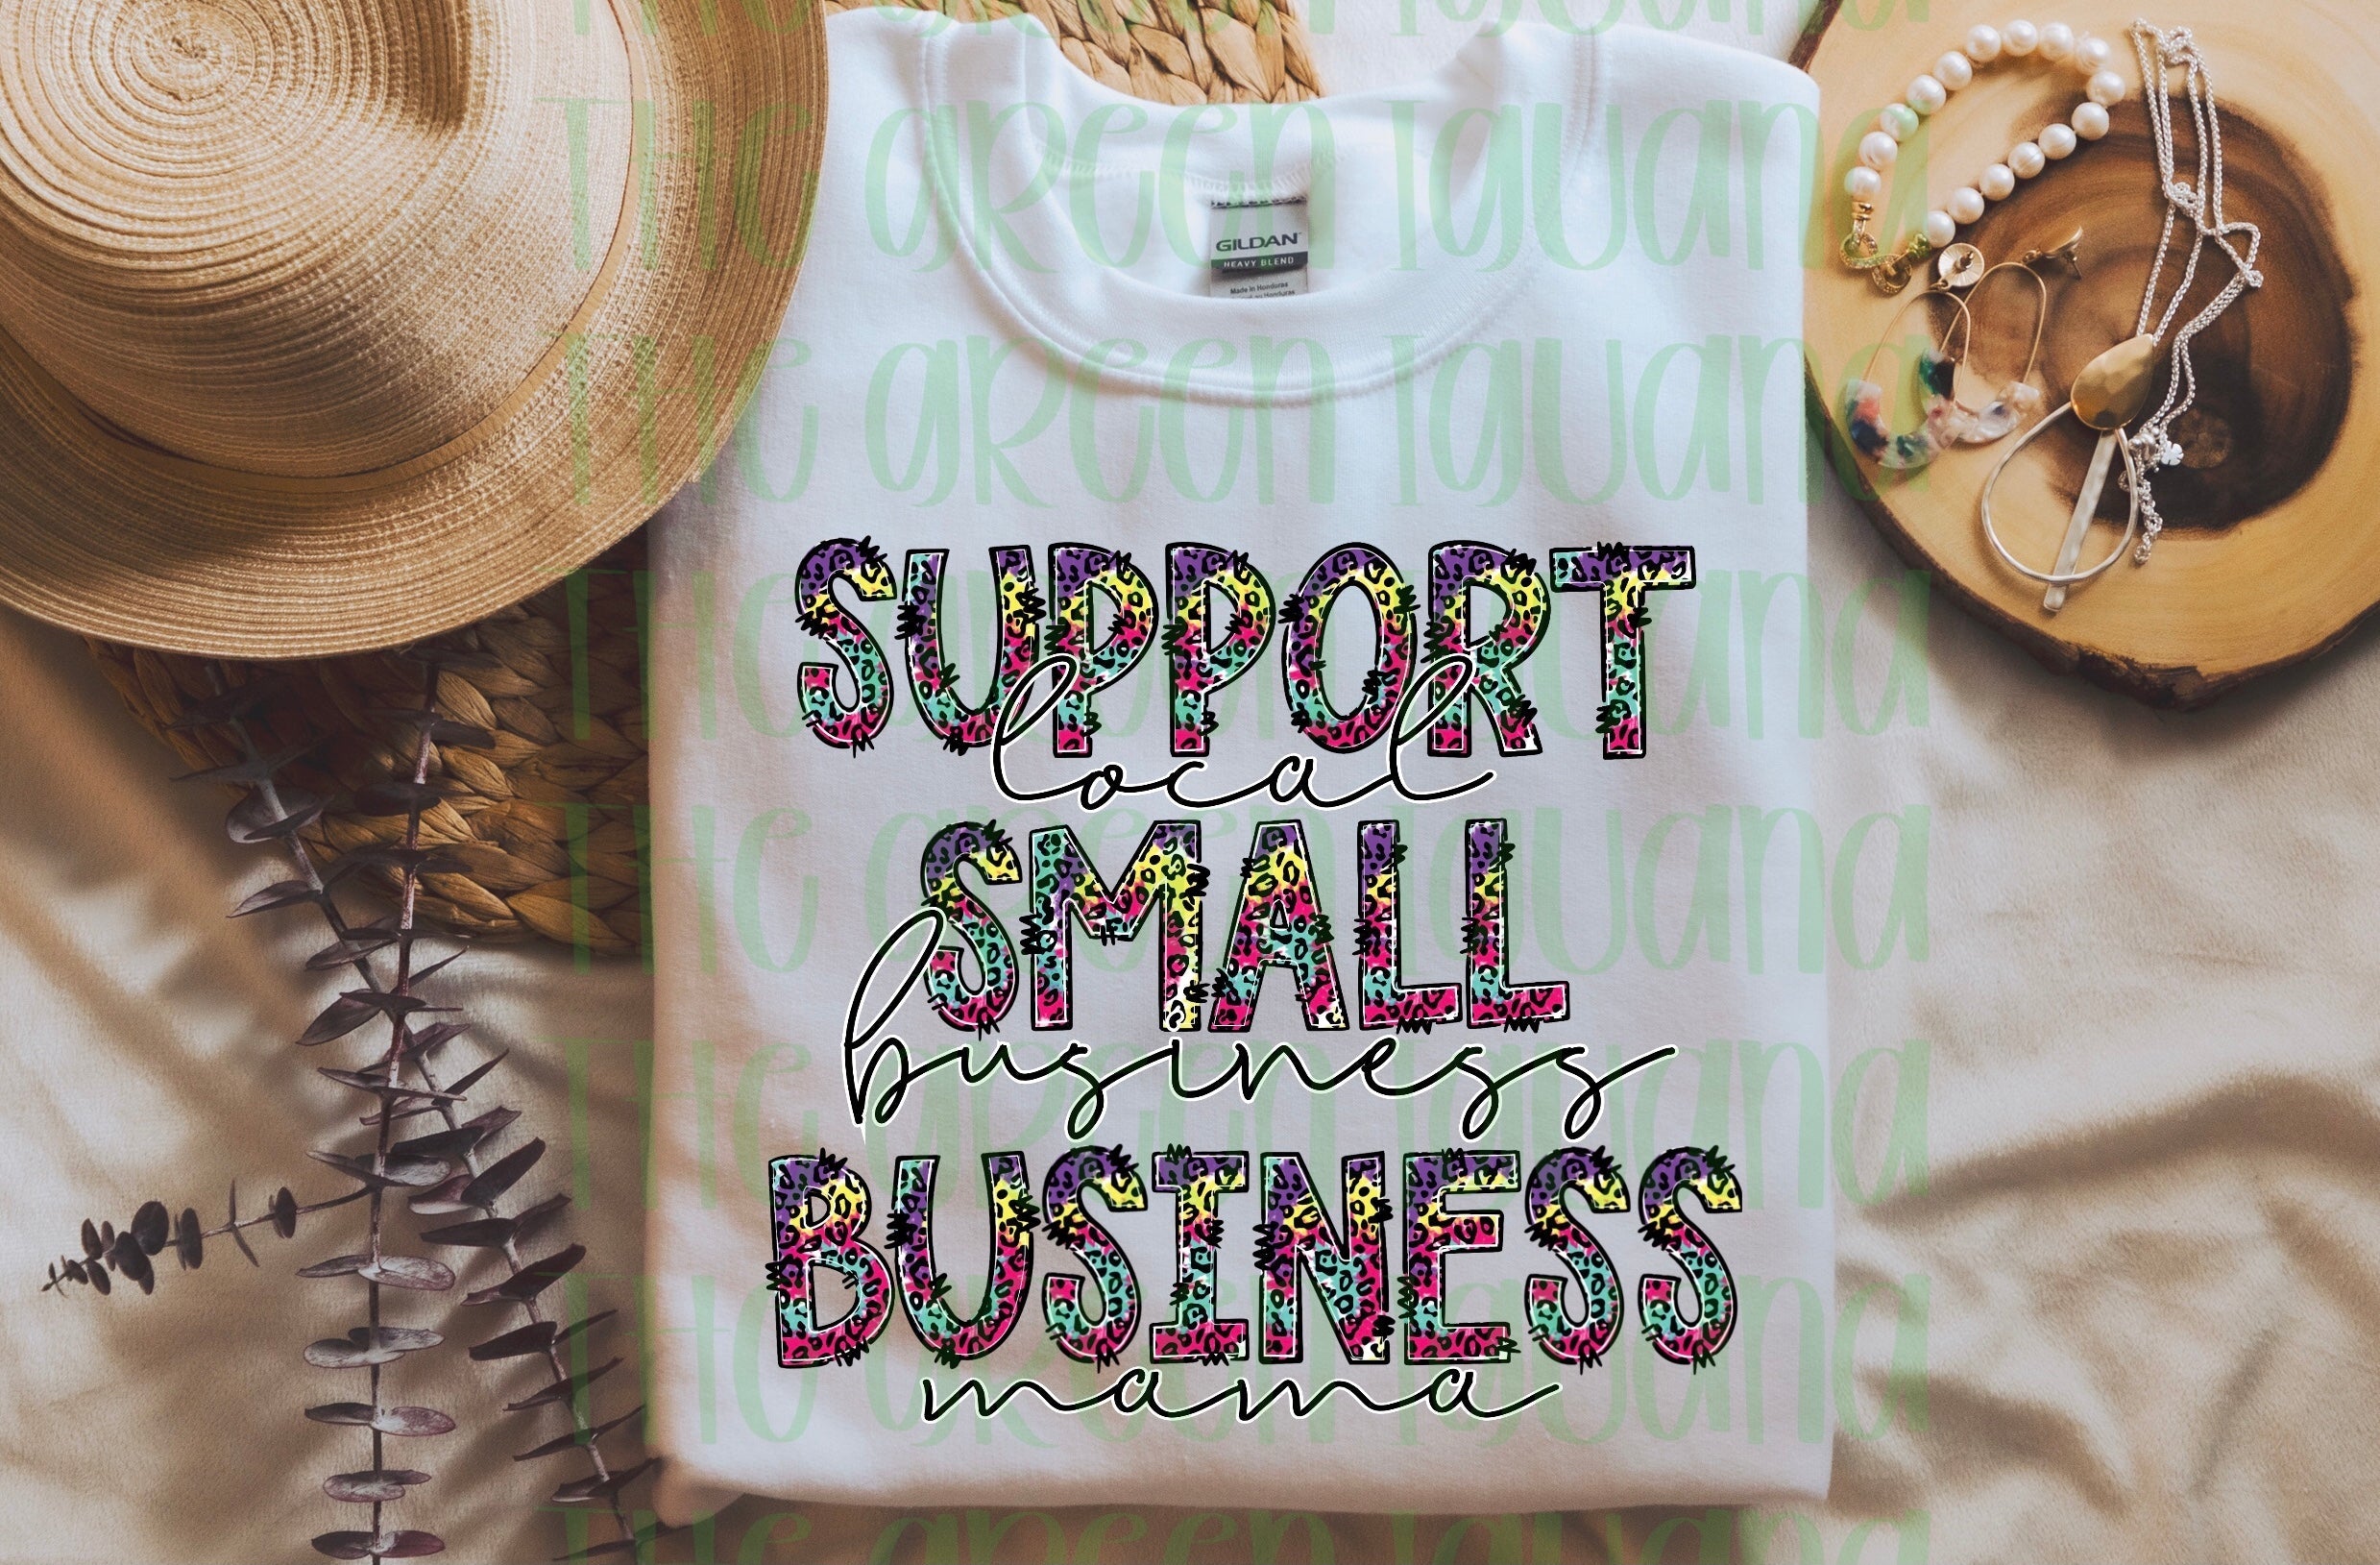 Support local. Small business. Business mama.